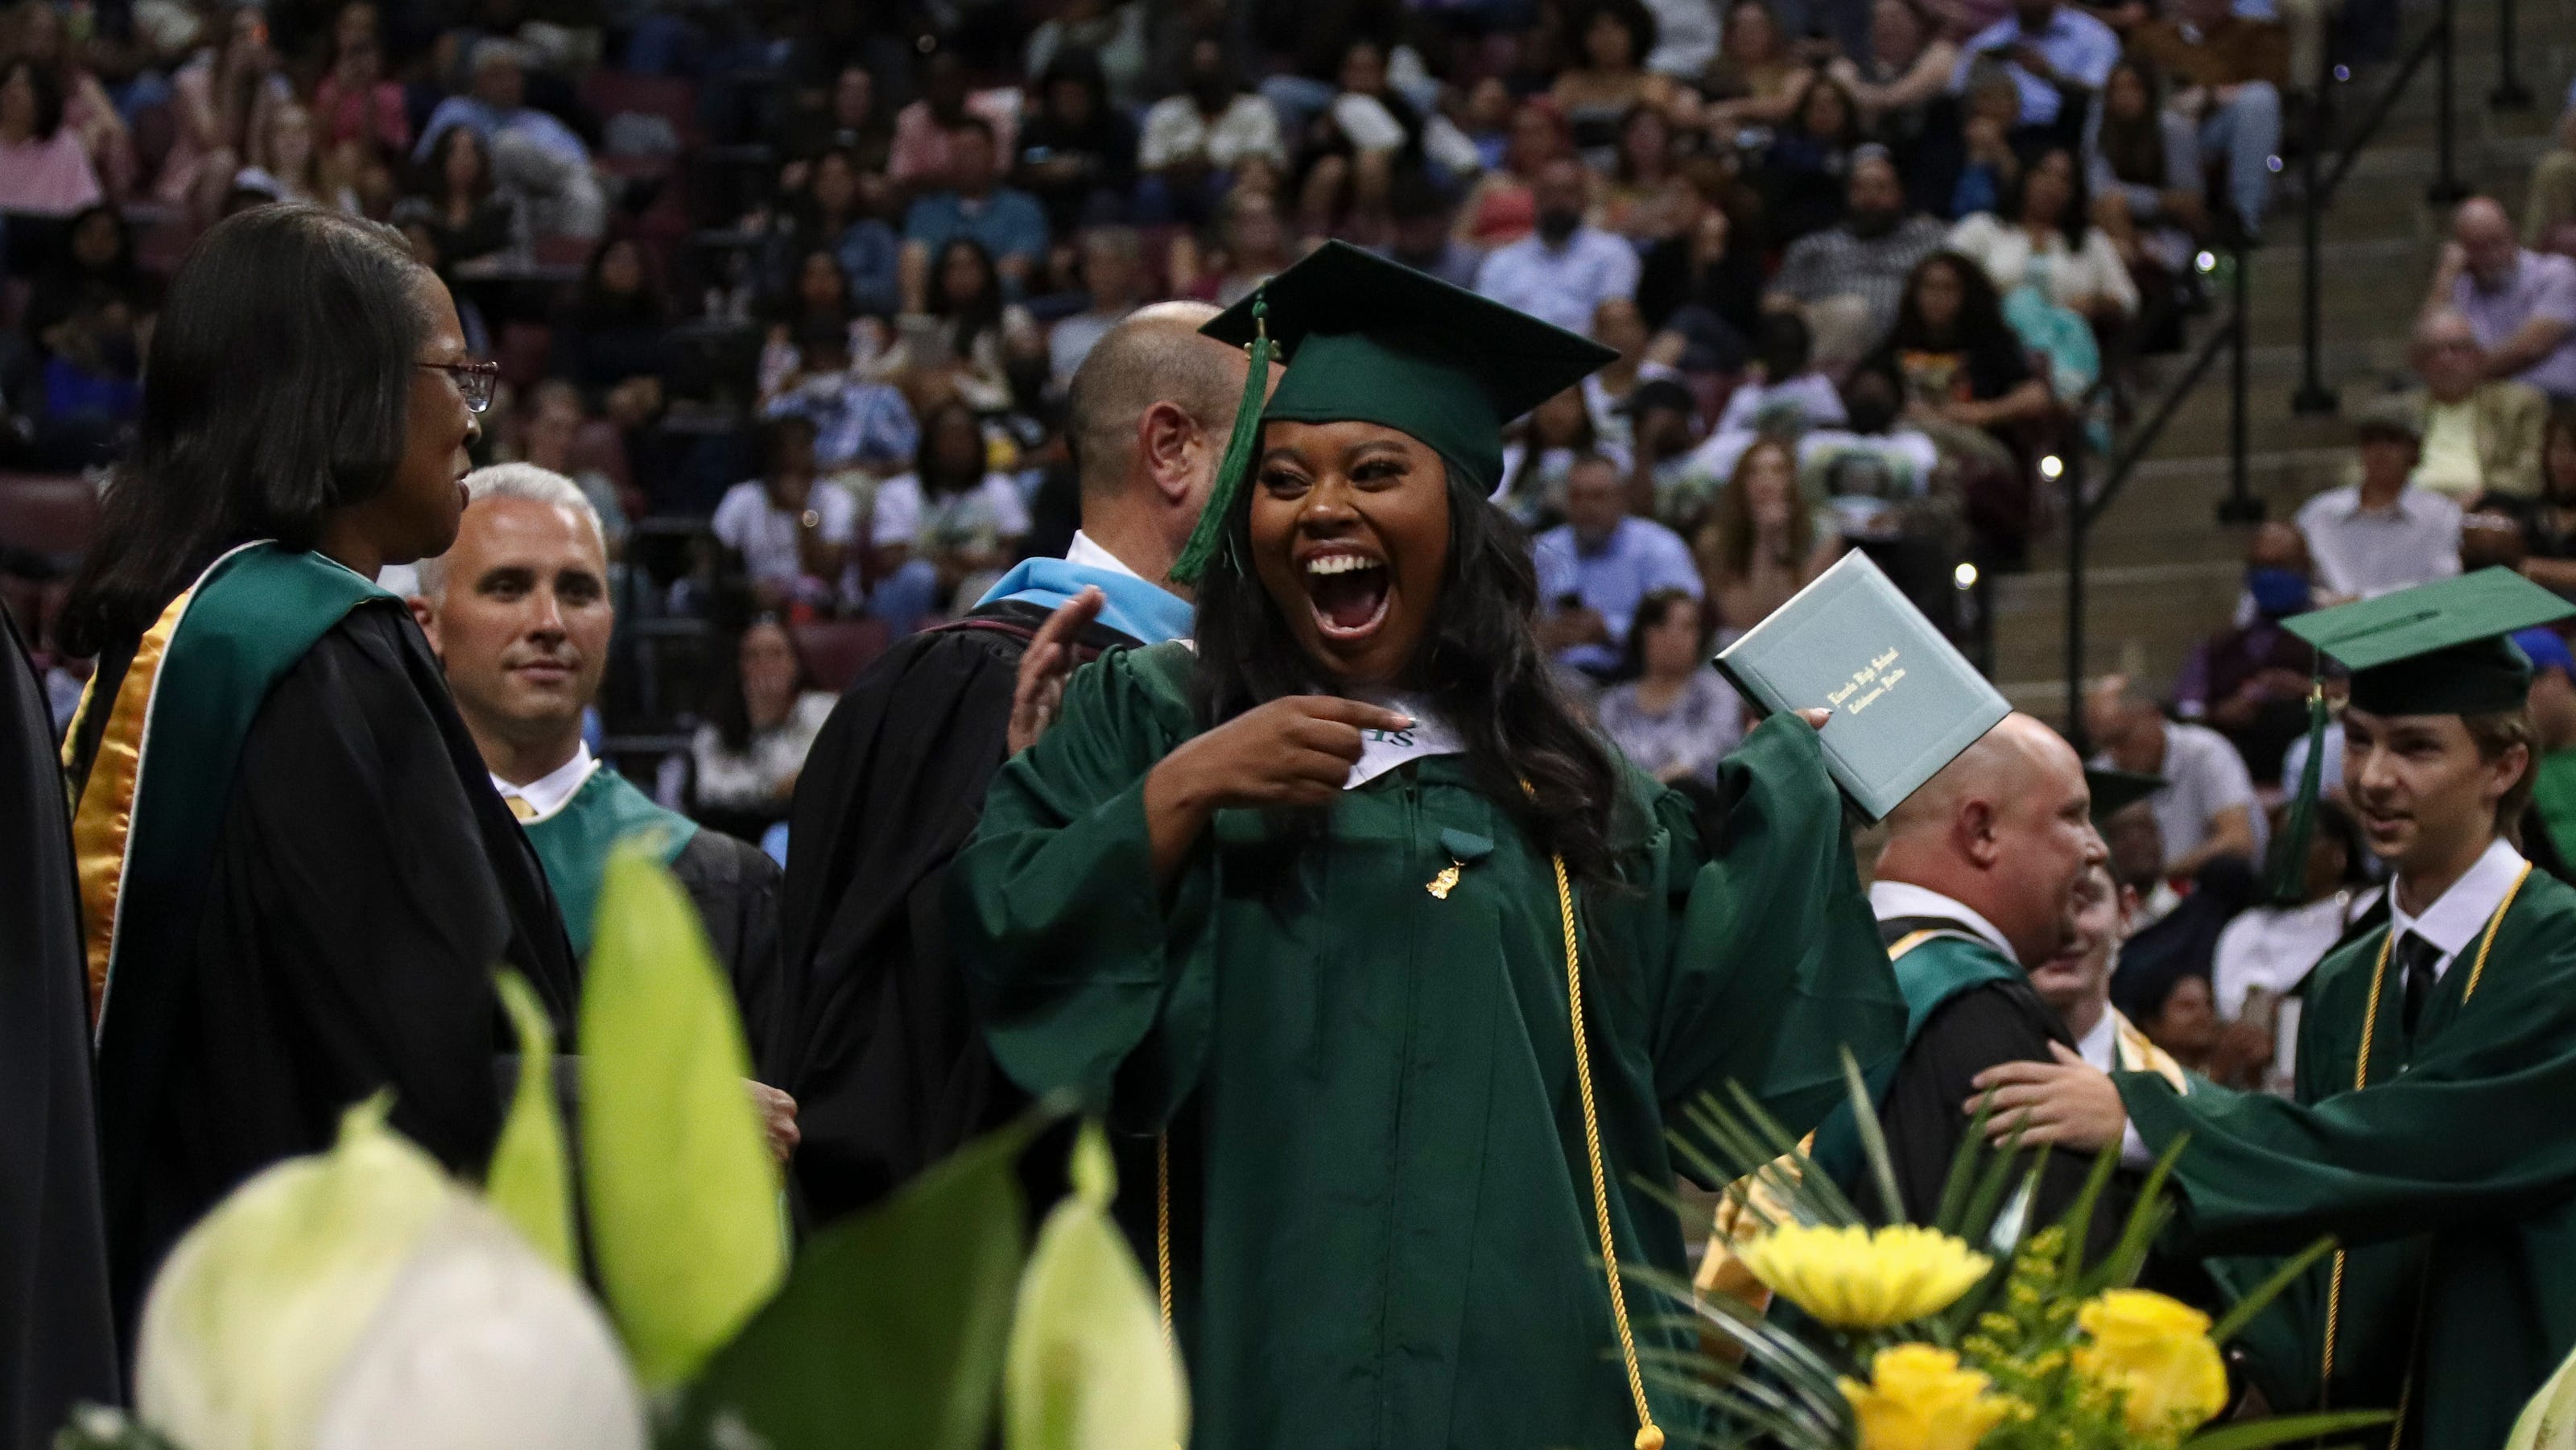 Lincoln High School 2022 graduation ceremony in Tallahassee, Florida